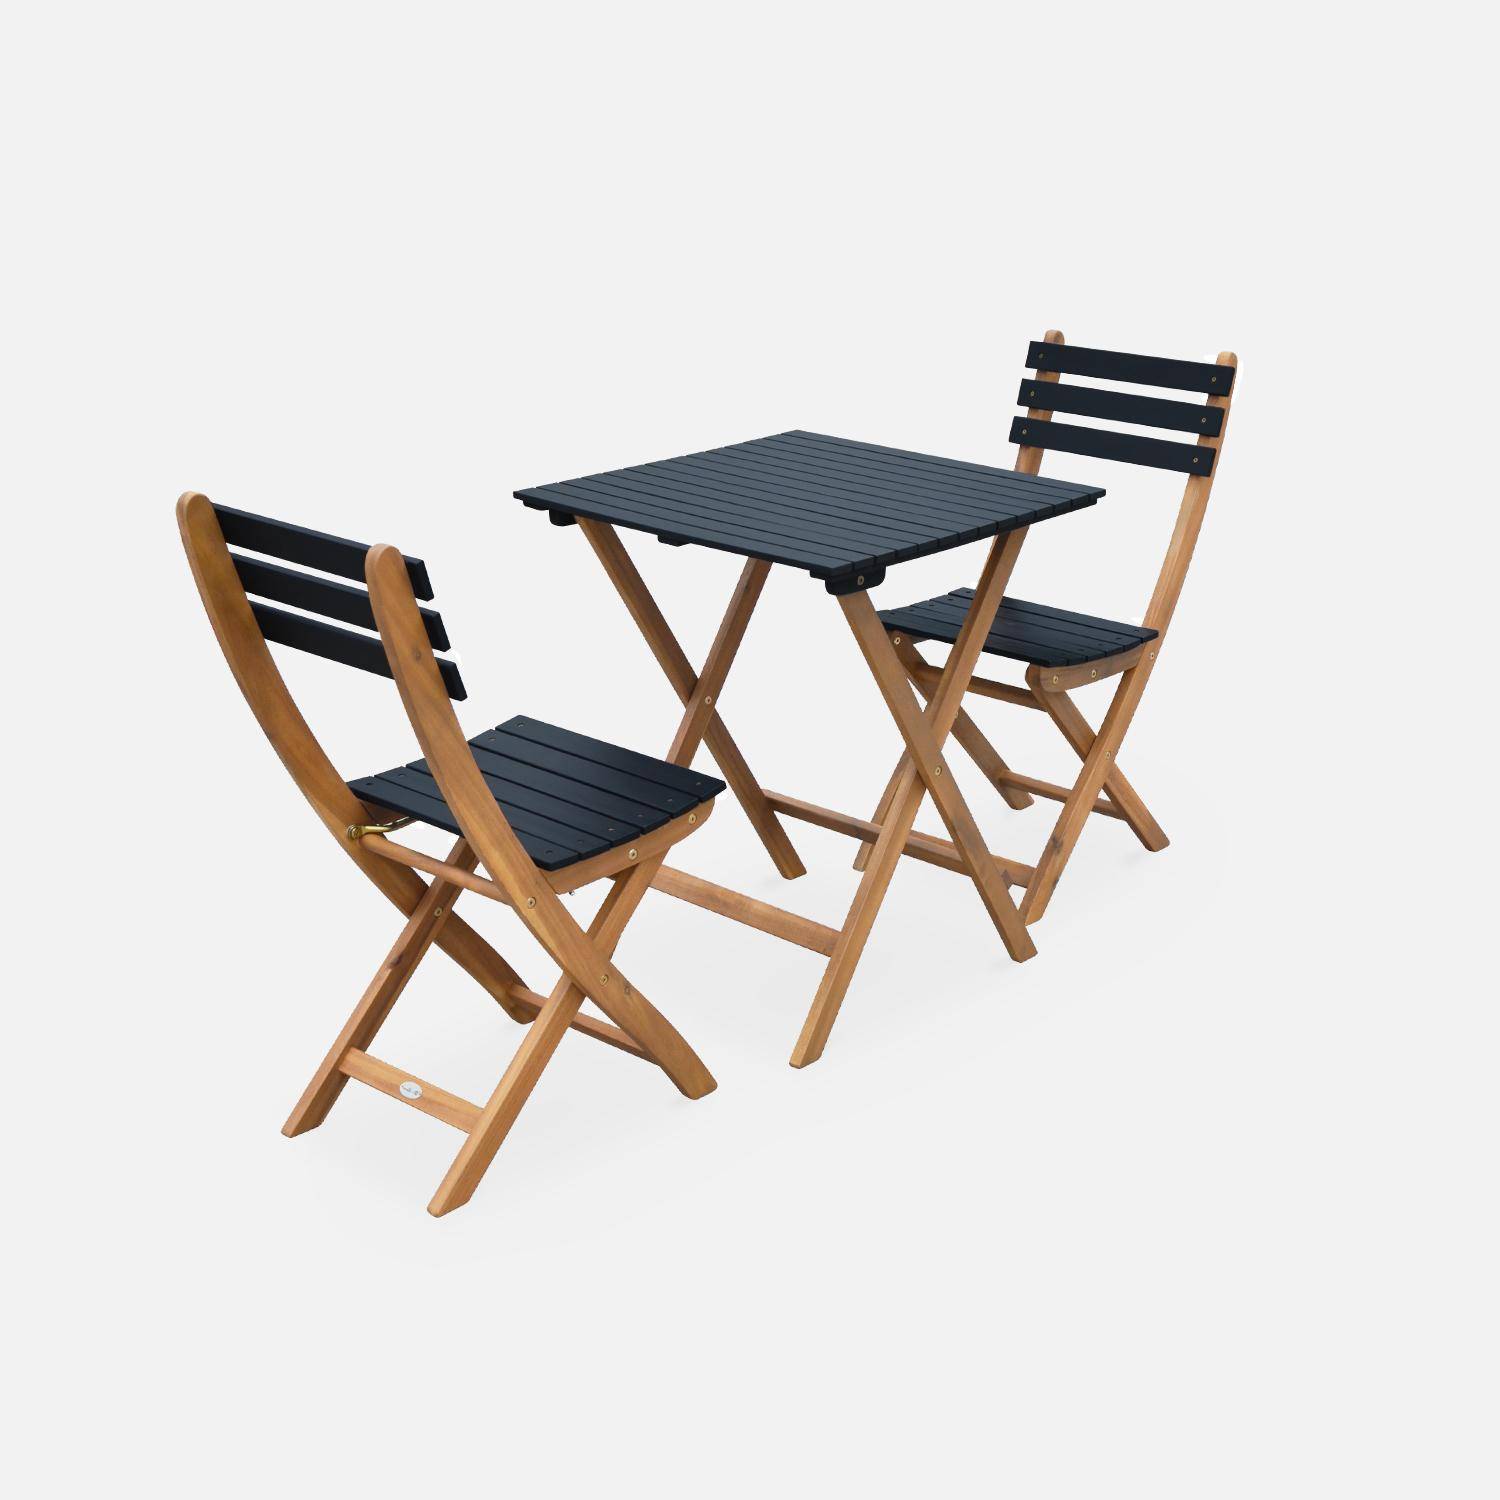 2-seater foldable wooden bistro garden table with chairs, 60x60cm - Barcelona - Black,sweeek,Photo4